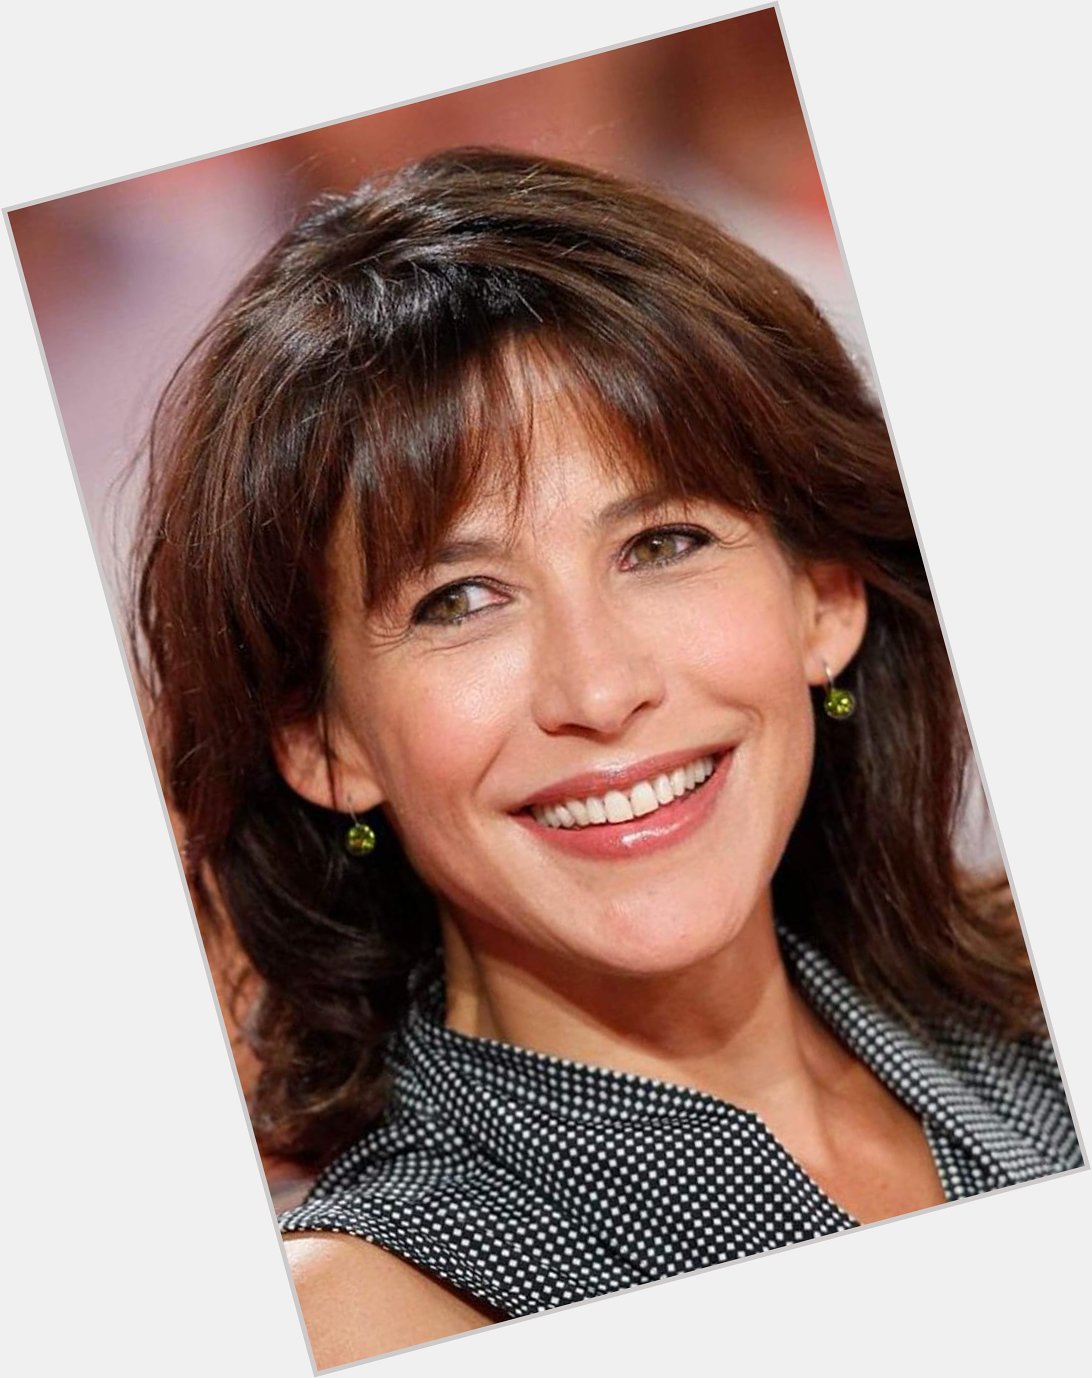 Happy Birthday Sophie Marceau.  New  Age 56. My best Wishes for you  